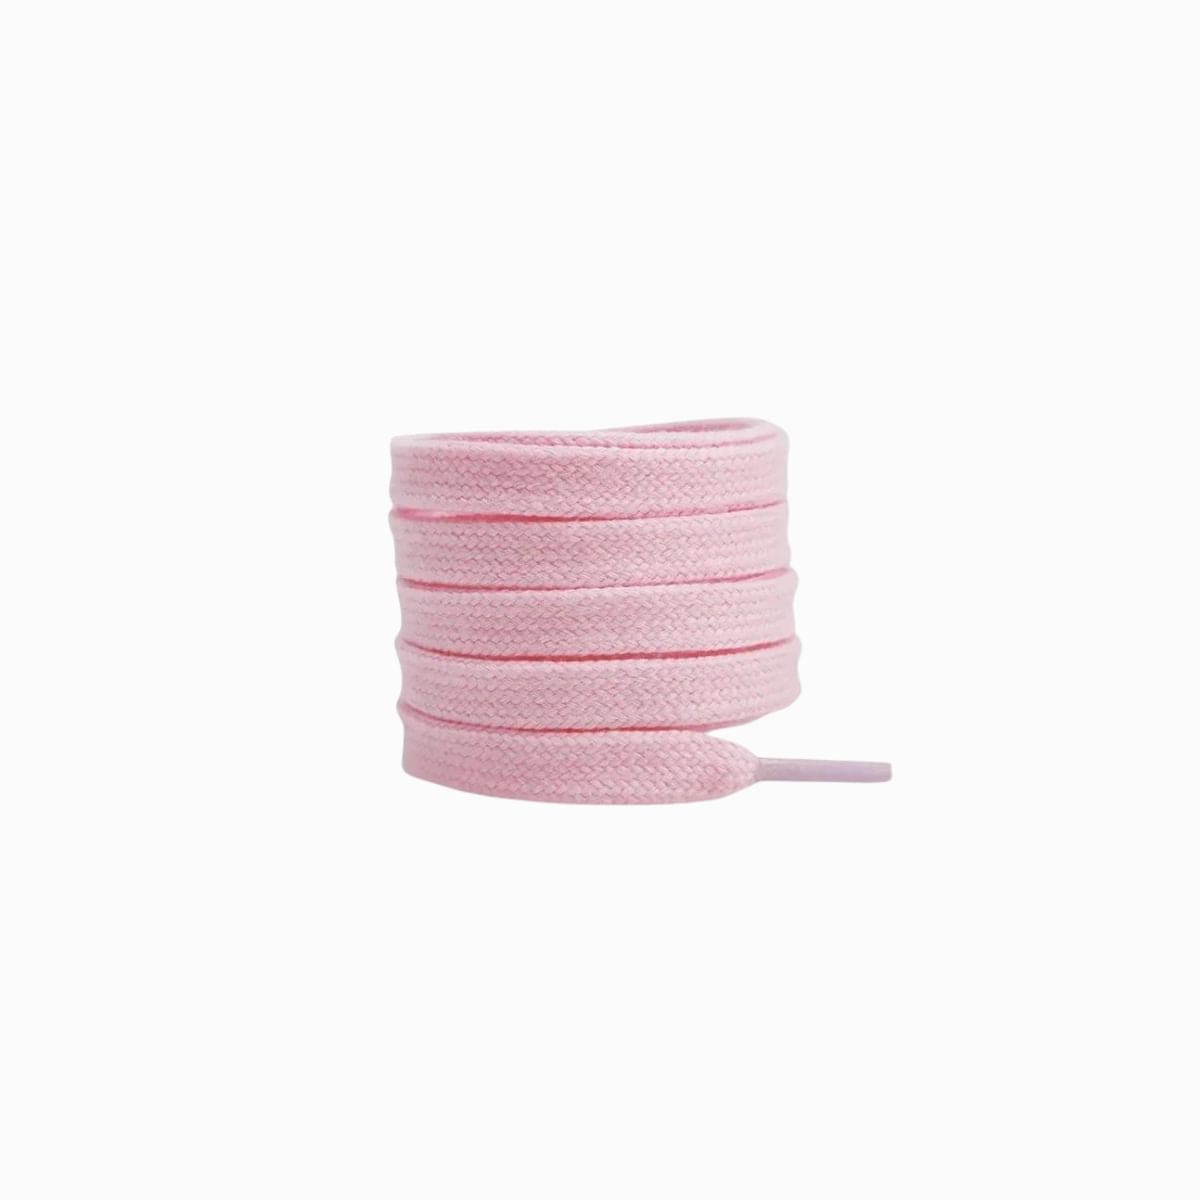 Light Pink Replacement Adidas Shoe Laces for Adidas Samba ADV Sneakers by Kicks Shoelaces